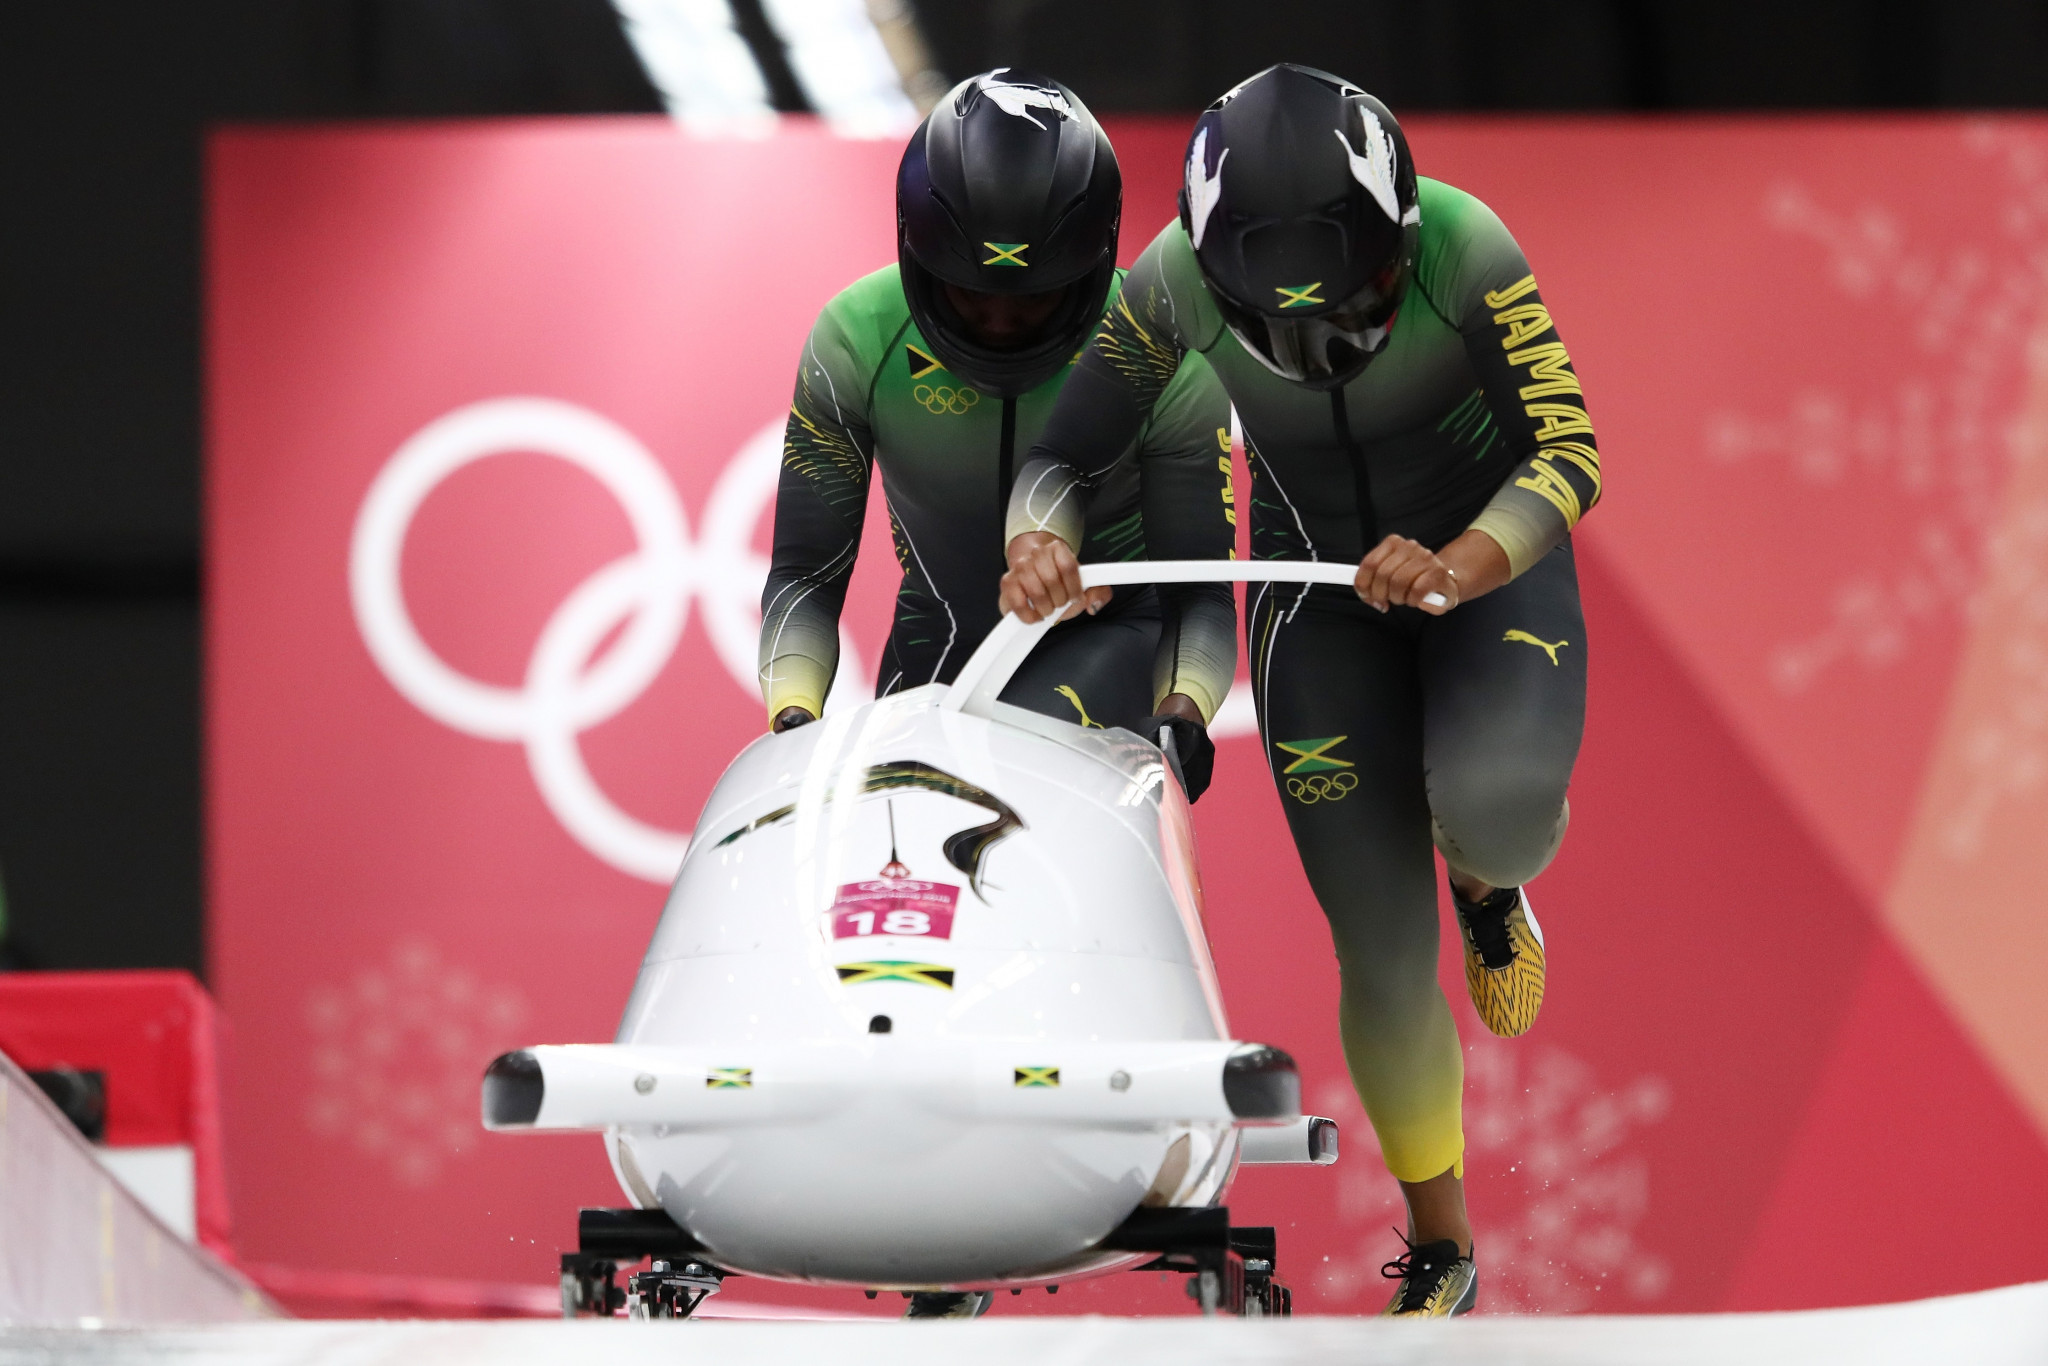 Jazmine Fenlator-Victorian and Carrie Russell represented Jamaica in the two-woman bobsleigh at the 2018 Winter Olympics ©Getty Images